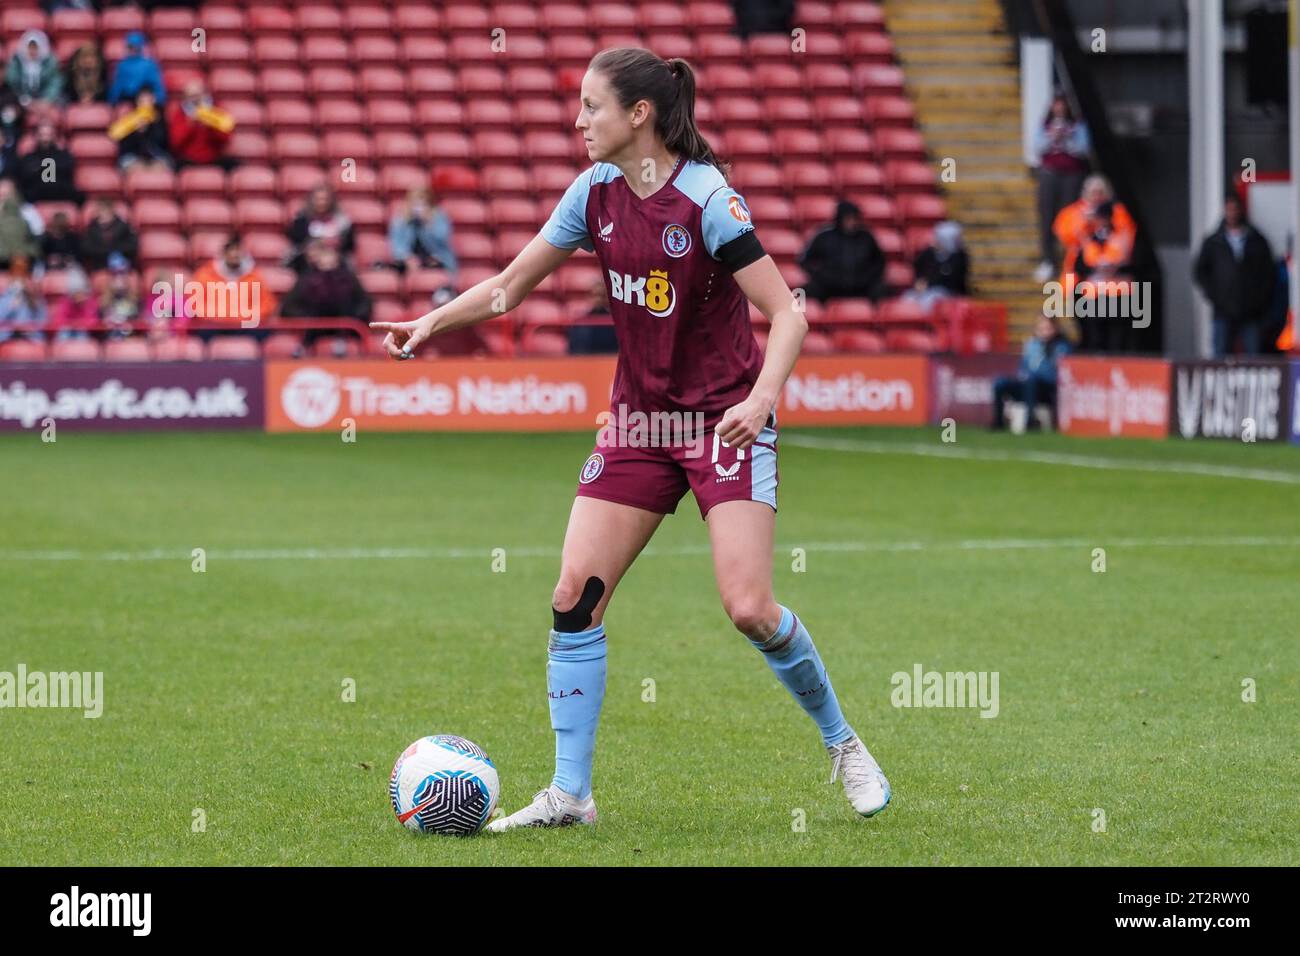 Walsall, UK. 21st Oct, 2023. Walsall, England, October 21st 2023: Danielle Turner (14 Aston Villa) on the ball during the Barclays FA Womens Super League match between Aston Villa and Tottenham Hotspur at Banks's Stadium in Walsall, England (Natalie Mincher/SPP) Credit: SPP Sport Press Photo. /Alamy Live News Stock Photo